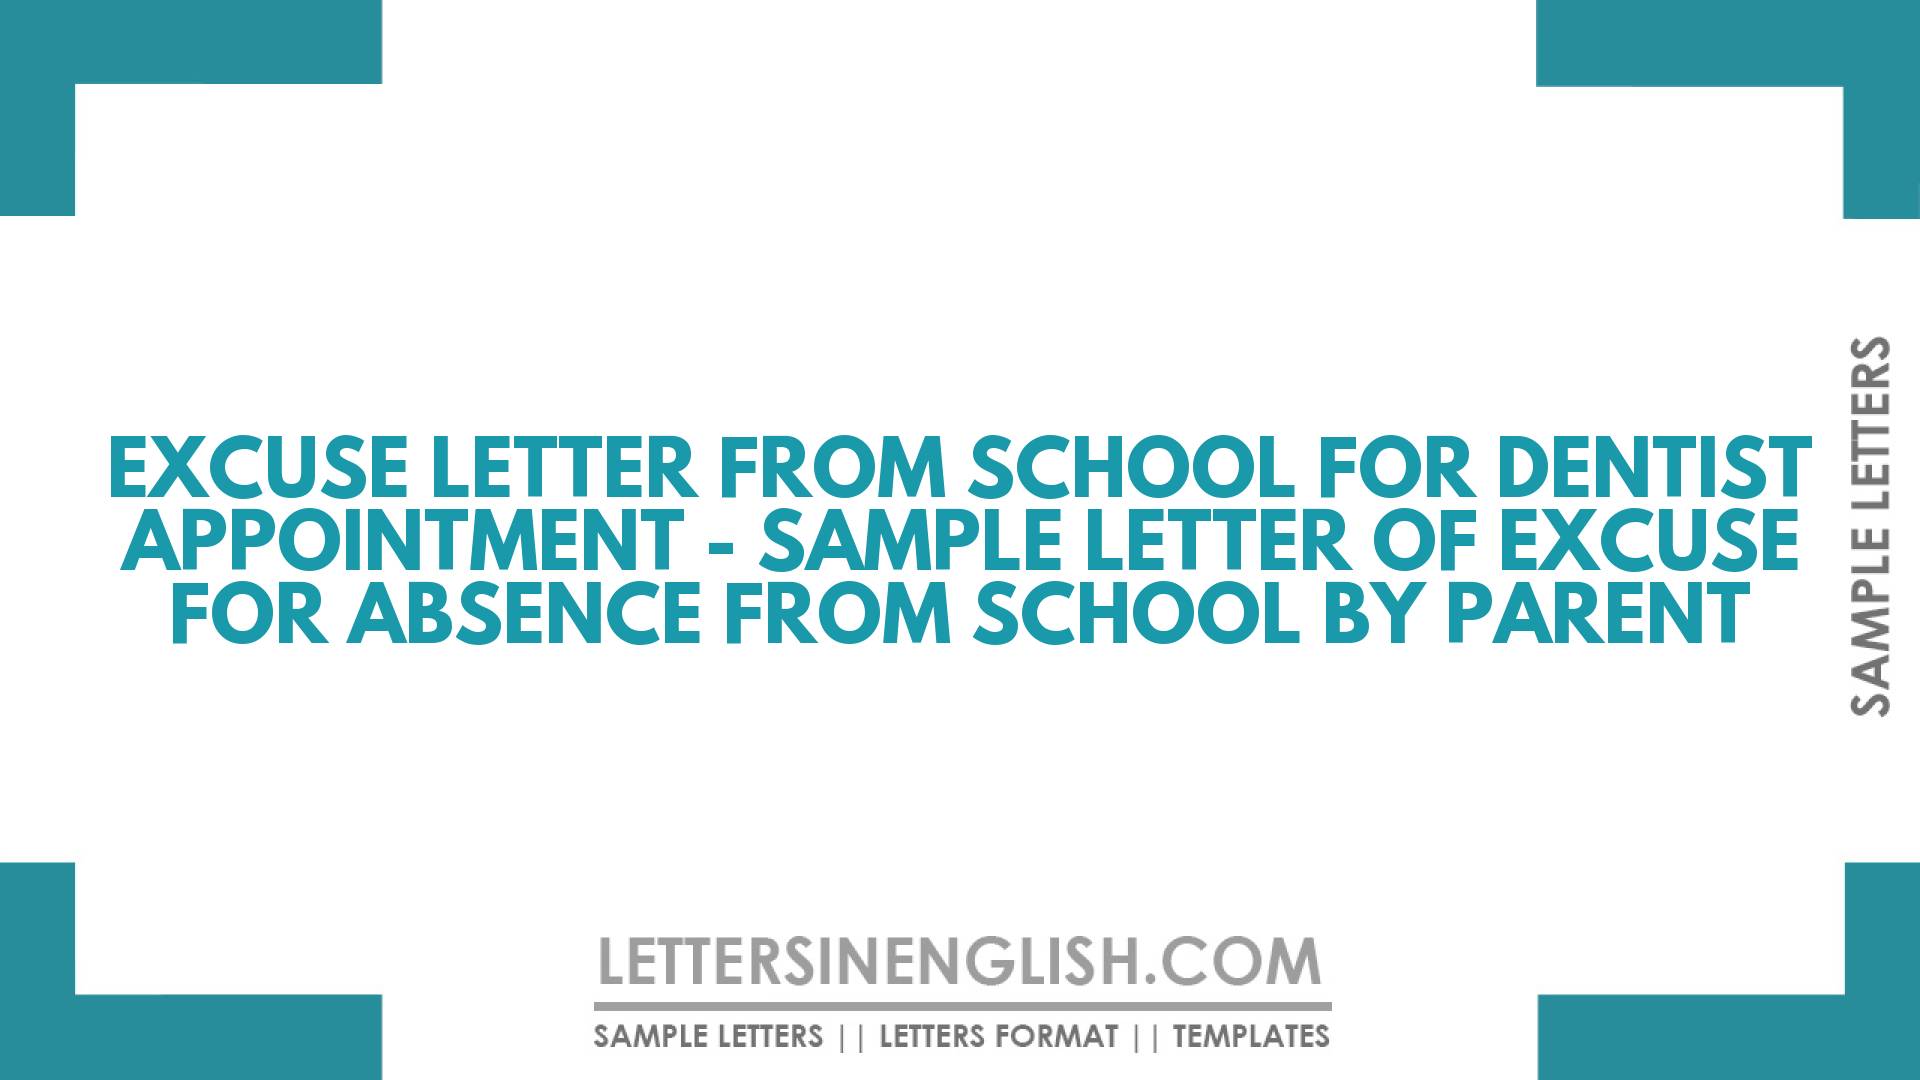 Excuse Letter from School for Dentist Appointment – Sample Letter of Excuse for Absence from School by Parent